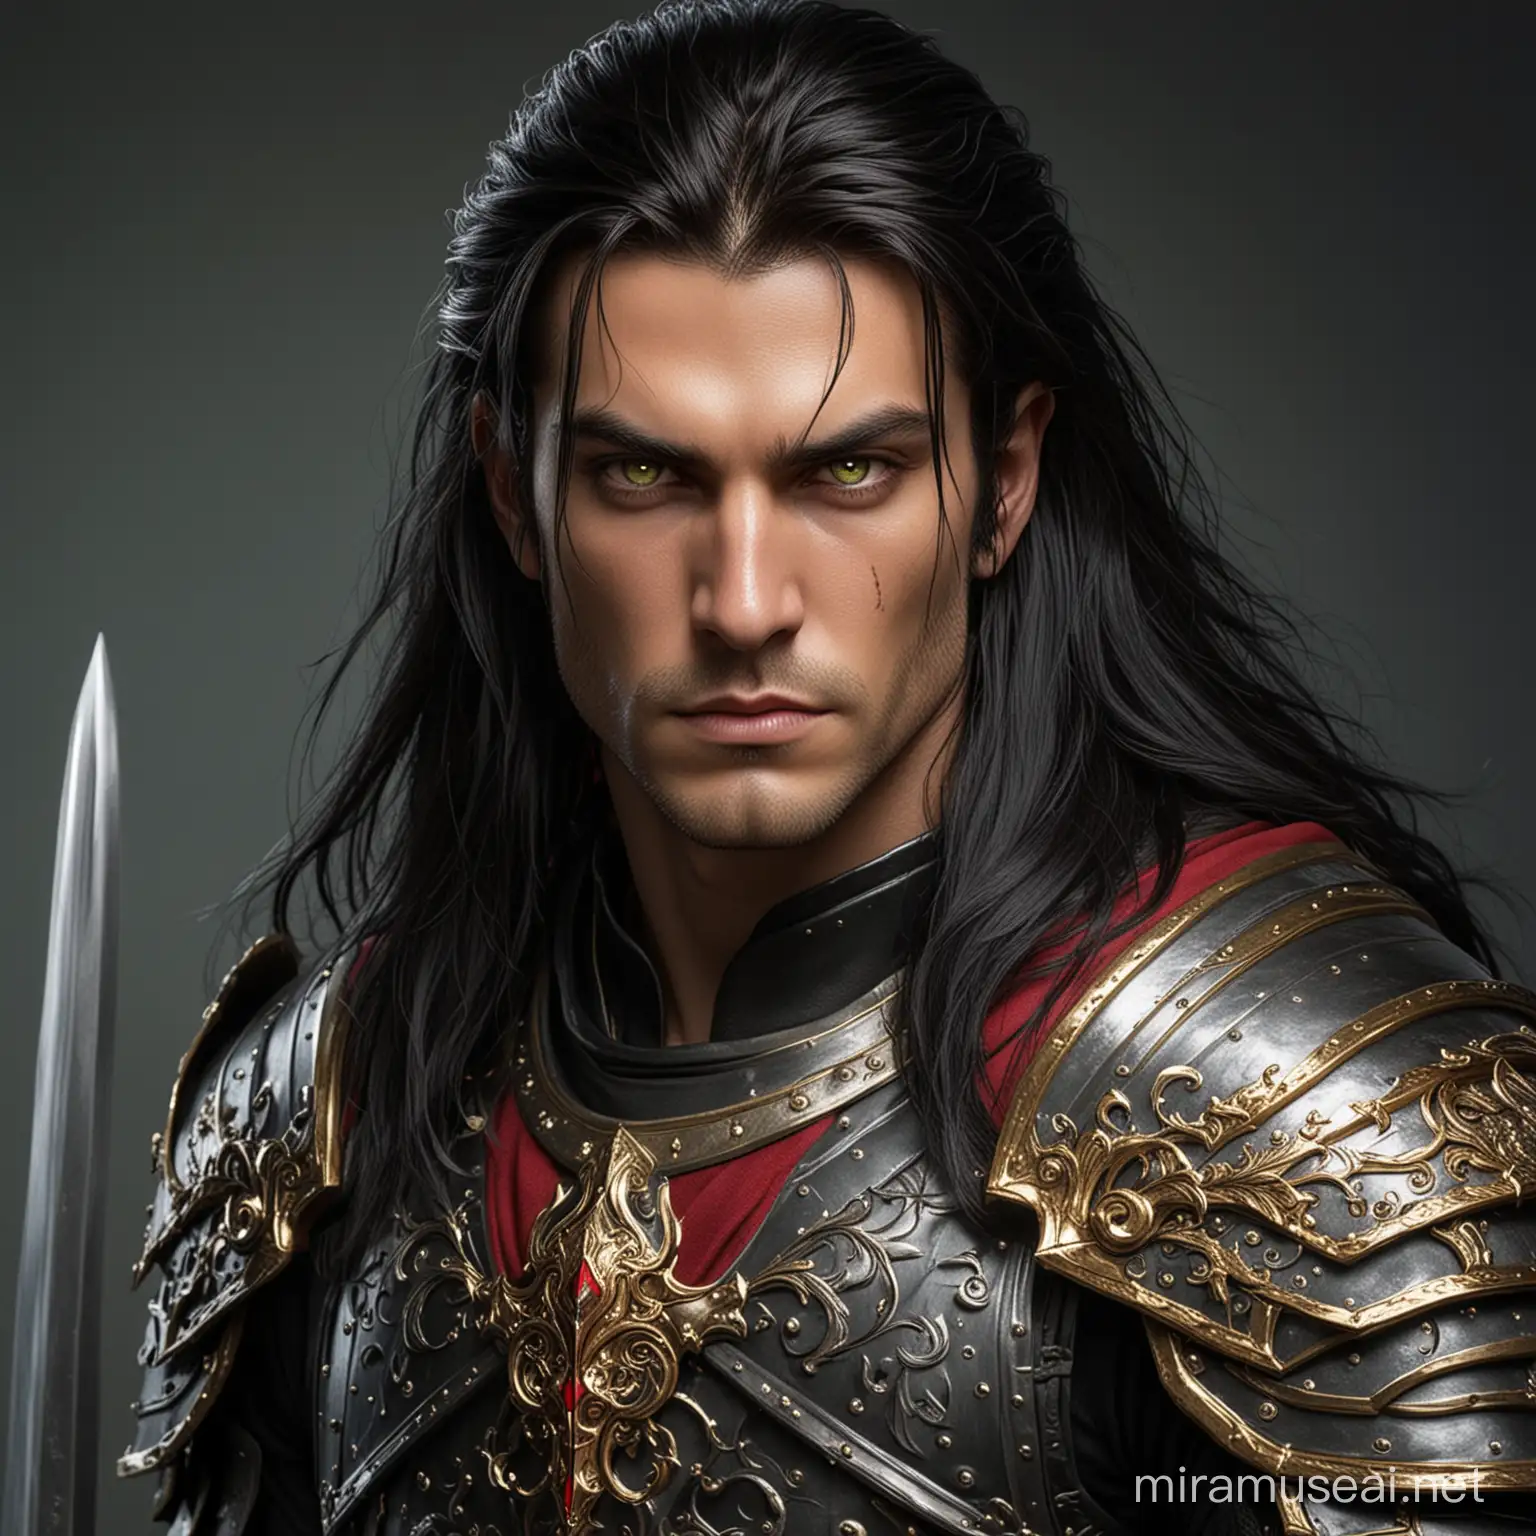 Fantasy warrior king, tall male human, sword fighter with green eyes, long black hair, wearing black armor with red and gold trimming